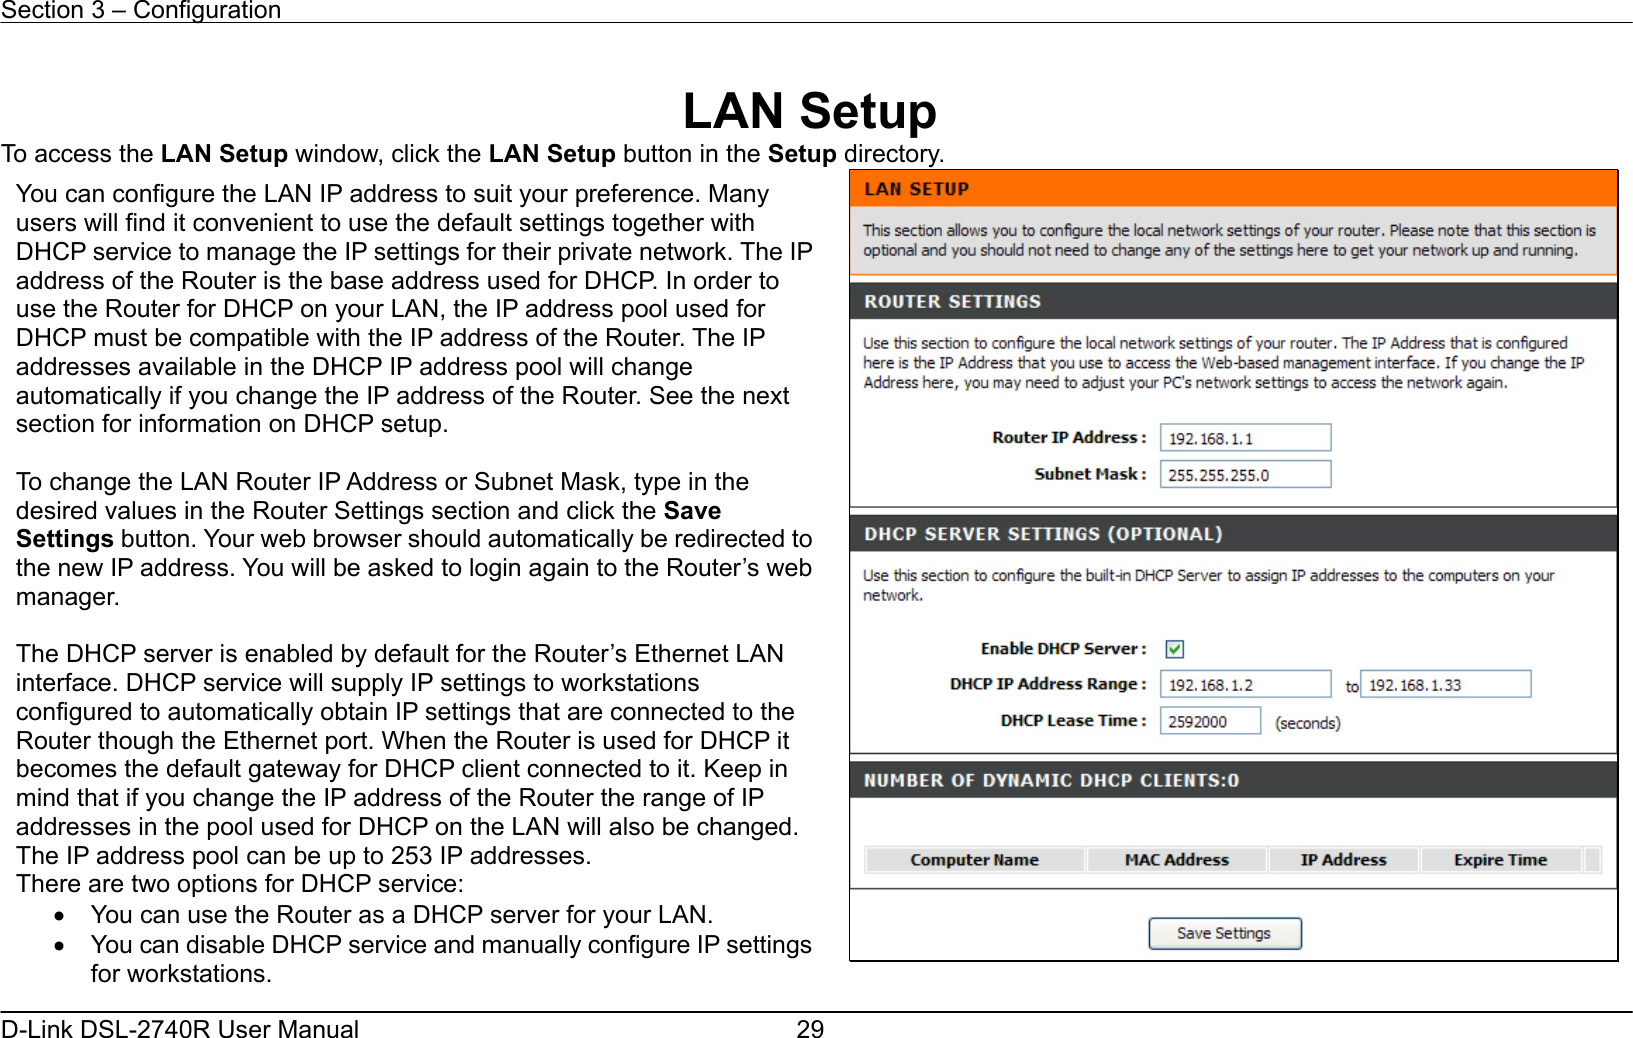 Section 3 – Configuration   D-Link DSL-2740R User Manual  29 LAN Setup To access the LAN Setup window, click the LAN Setup button in the Setup directory.   You can configure the LAN IP address to suit your preference. Many users will find it convenient to use the default settings together with DHCP service to manage the IP settings for their private network. The IPaddress of the Router is the base address used for DHCP. In order to use the Router for DHCP on your LAN, the IP address pool used for DHCP must be compatible with the IP address of the Router. The IP addresses available in the DHCP IP address pool will change automatically if you change the IP address of the Router. See the next section for information on DHCP setup.  To change the LAN Router IP Address or Subnet Mask, type in the desired values in the Router Settings section and click the Save Settings button. Your web browser should automatically be redirected to the new IP address. You will be asked to login again to the Router’s webmanager.  The DHCP server is enabled by default for the Router’s Ethernet LAN interface. DHCP service will supply IP settings to workstations configured to automatically obtain IP settings that are connected to the Router though the Ethernet port. When the Router is used for DHCP it becomes the default gateway for DHCP client connected to it. Keep in mind that if you change the IP address of the Router the range of IP addresses in the pool used for DHCP on the LAN will also be changed. The IP address pool can be up to 253 IP addresses. There are two options for DHCP service:   •  You can use the Router as a DHCP server for your LAN.   •  You can disable DHCP service and manually configure IP settings for workstations. 